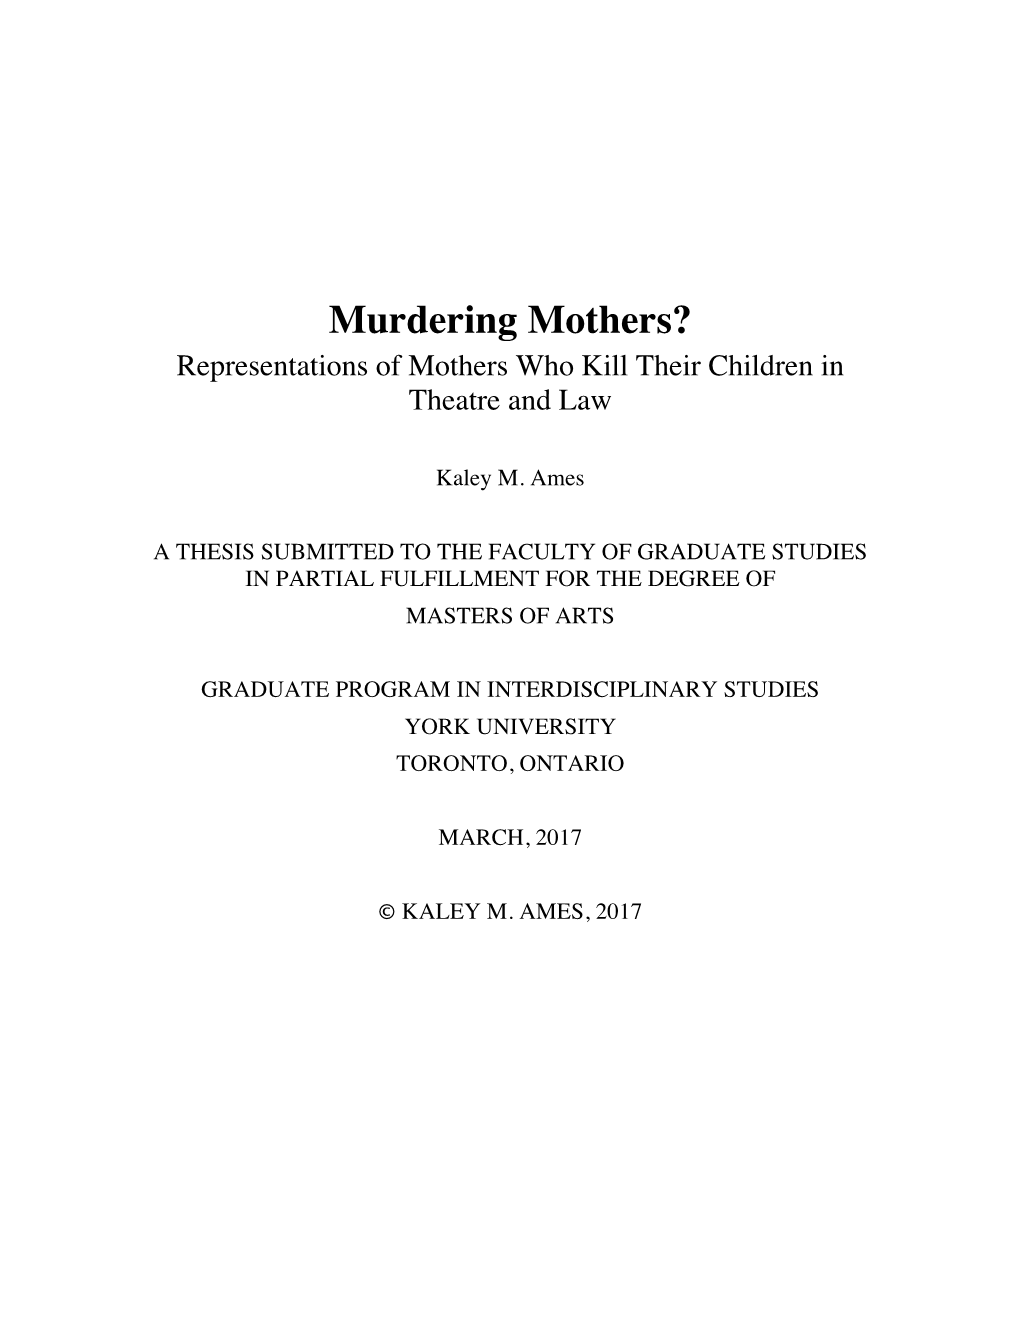 Murdering Mothers? Representations of Mothers Who Kill Their Children in Theatre and Law